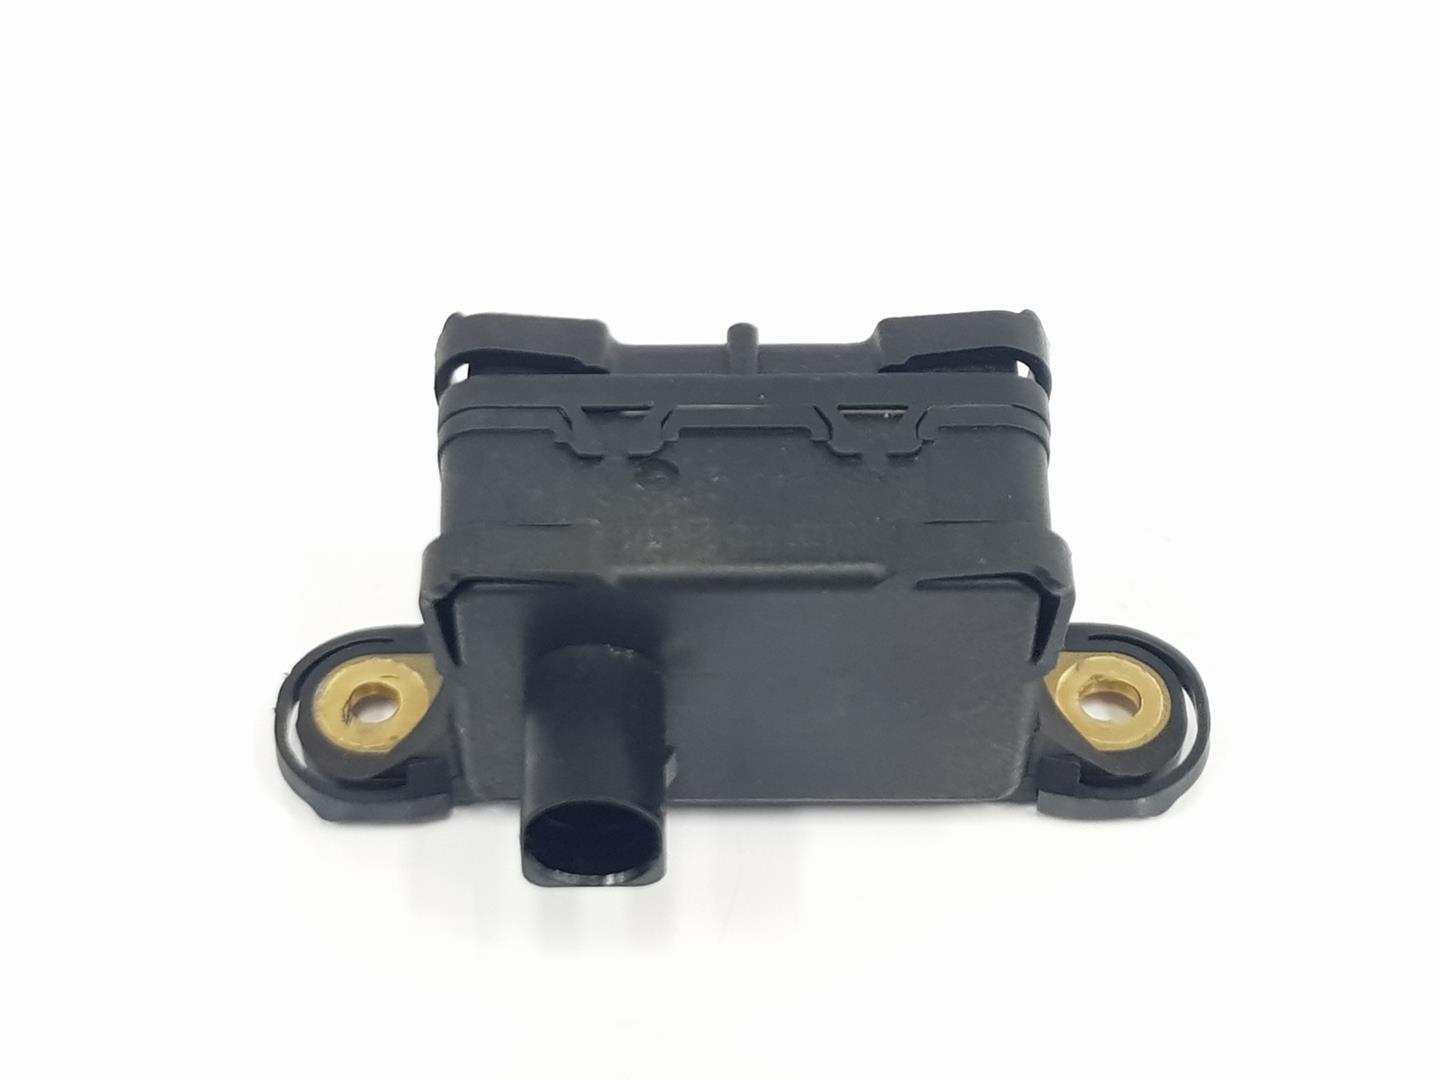 VOLKSWAGEN Touareg 1 generation (2002-2010) Other Control Units 7H0907652A, 7H0907652A 19932698